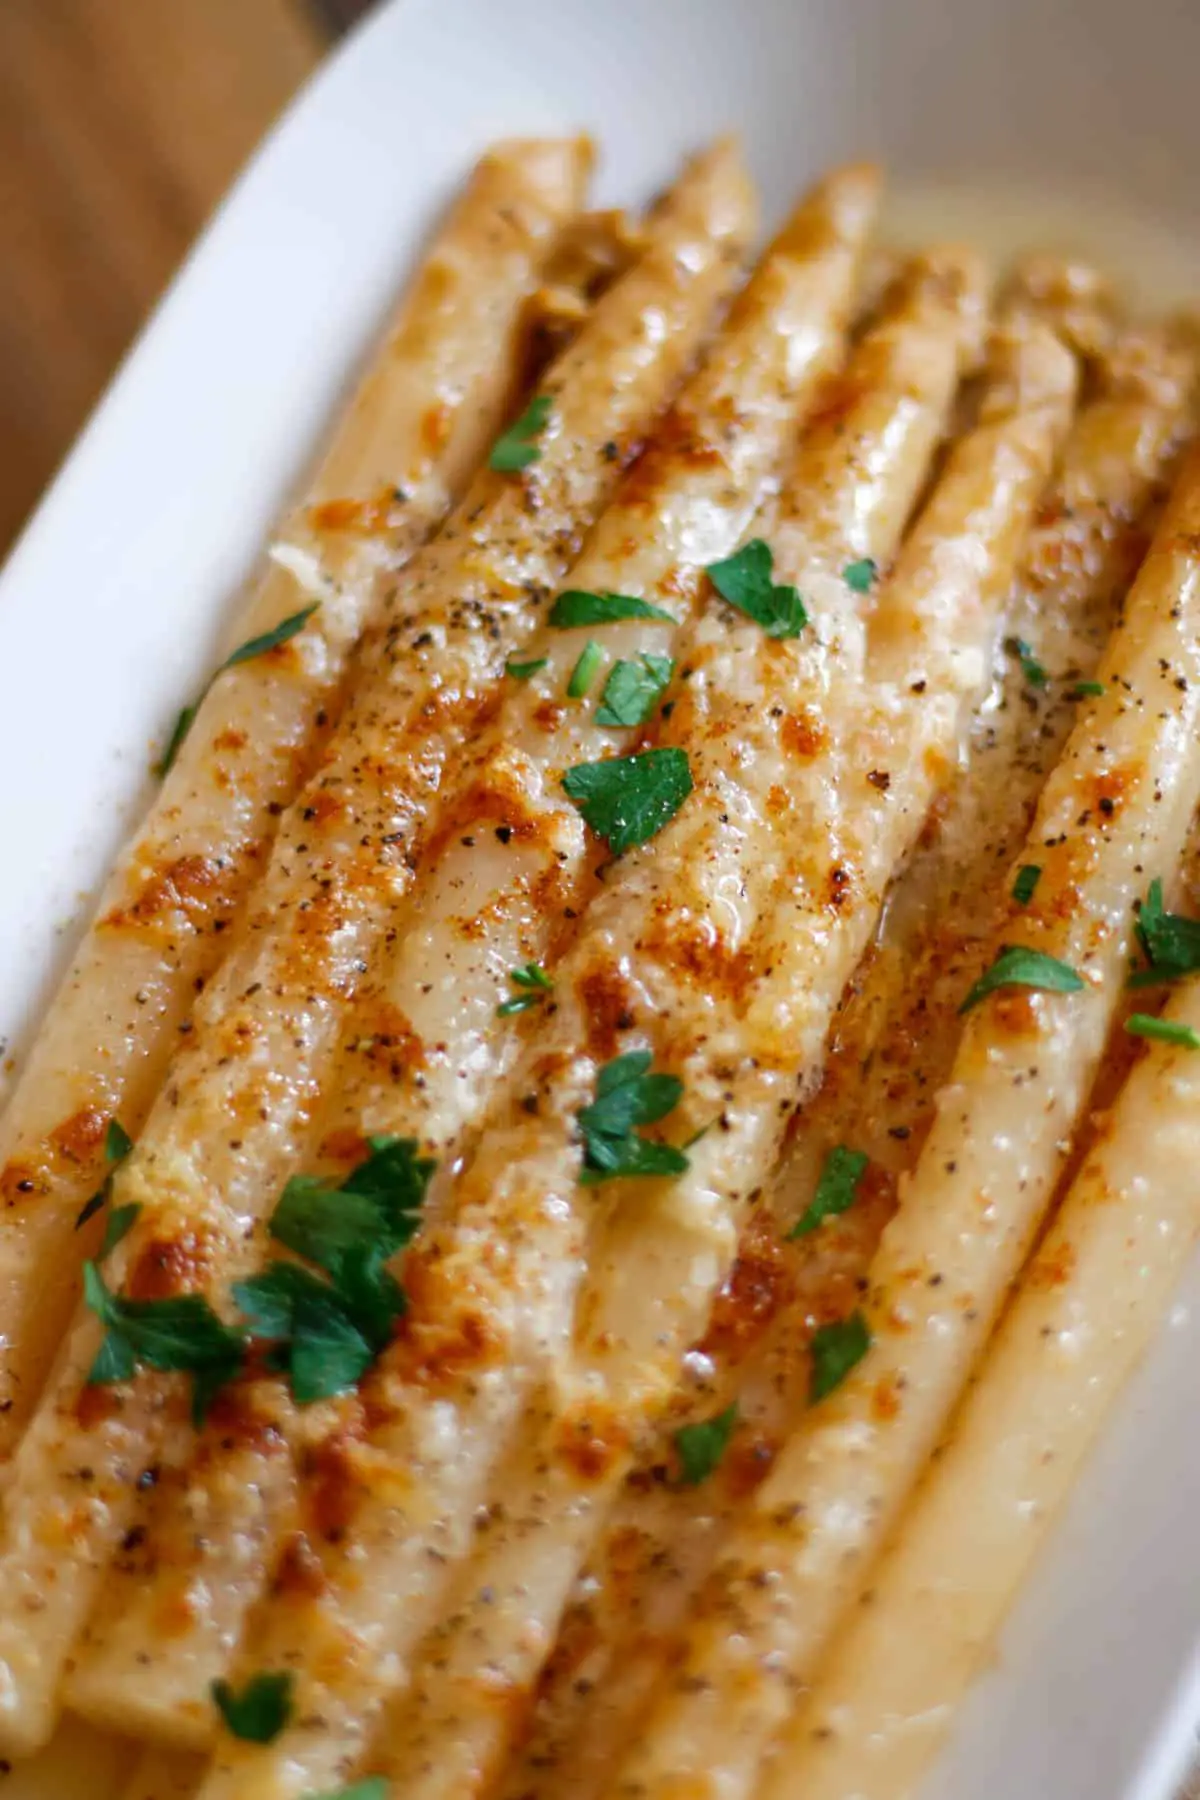 White asparagus spears in a white serving dish with melted Parmesan cheese garnished with Italian parsley.